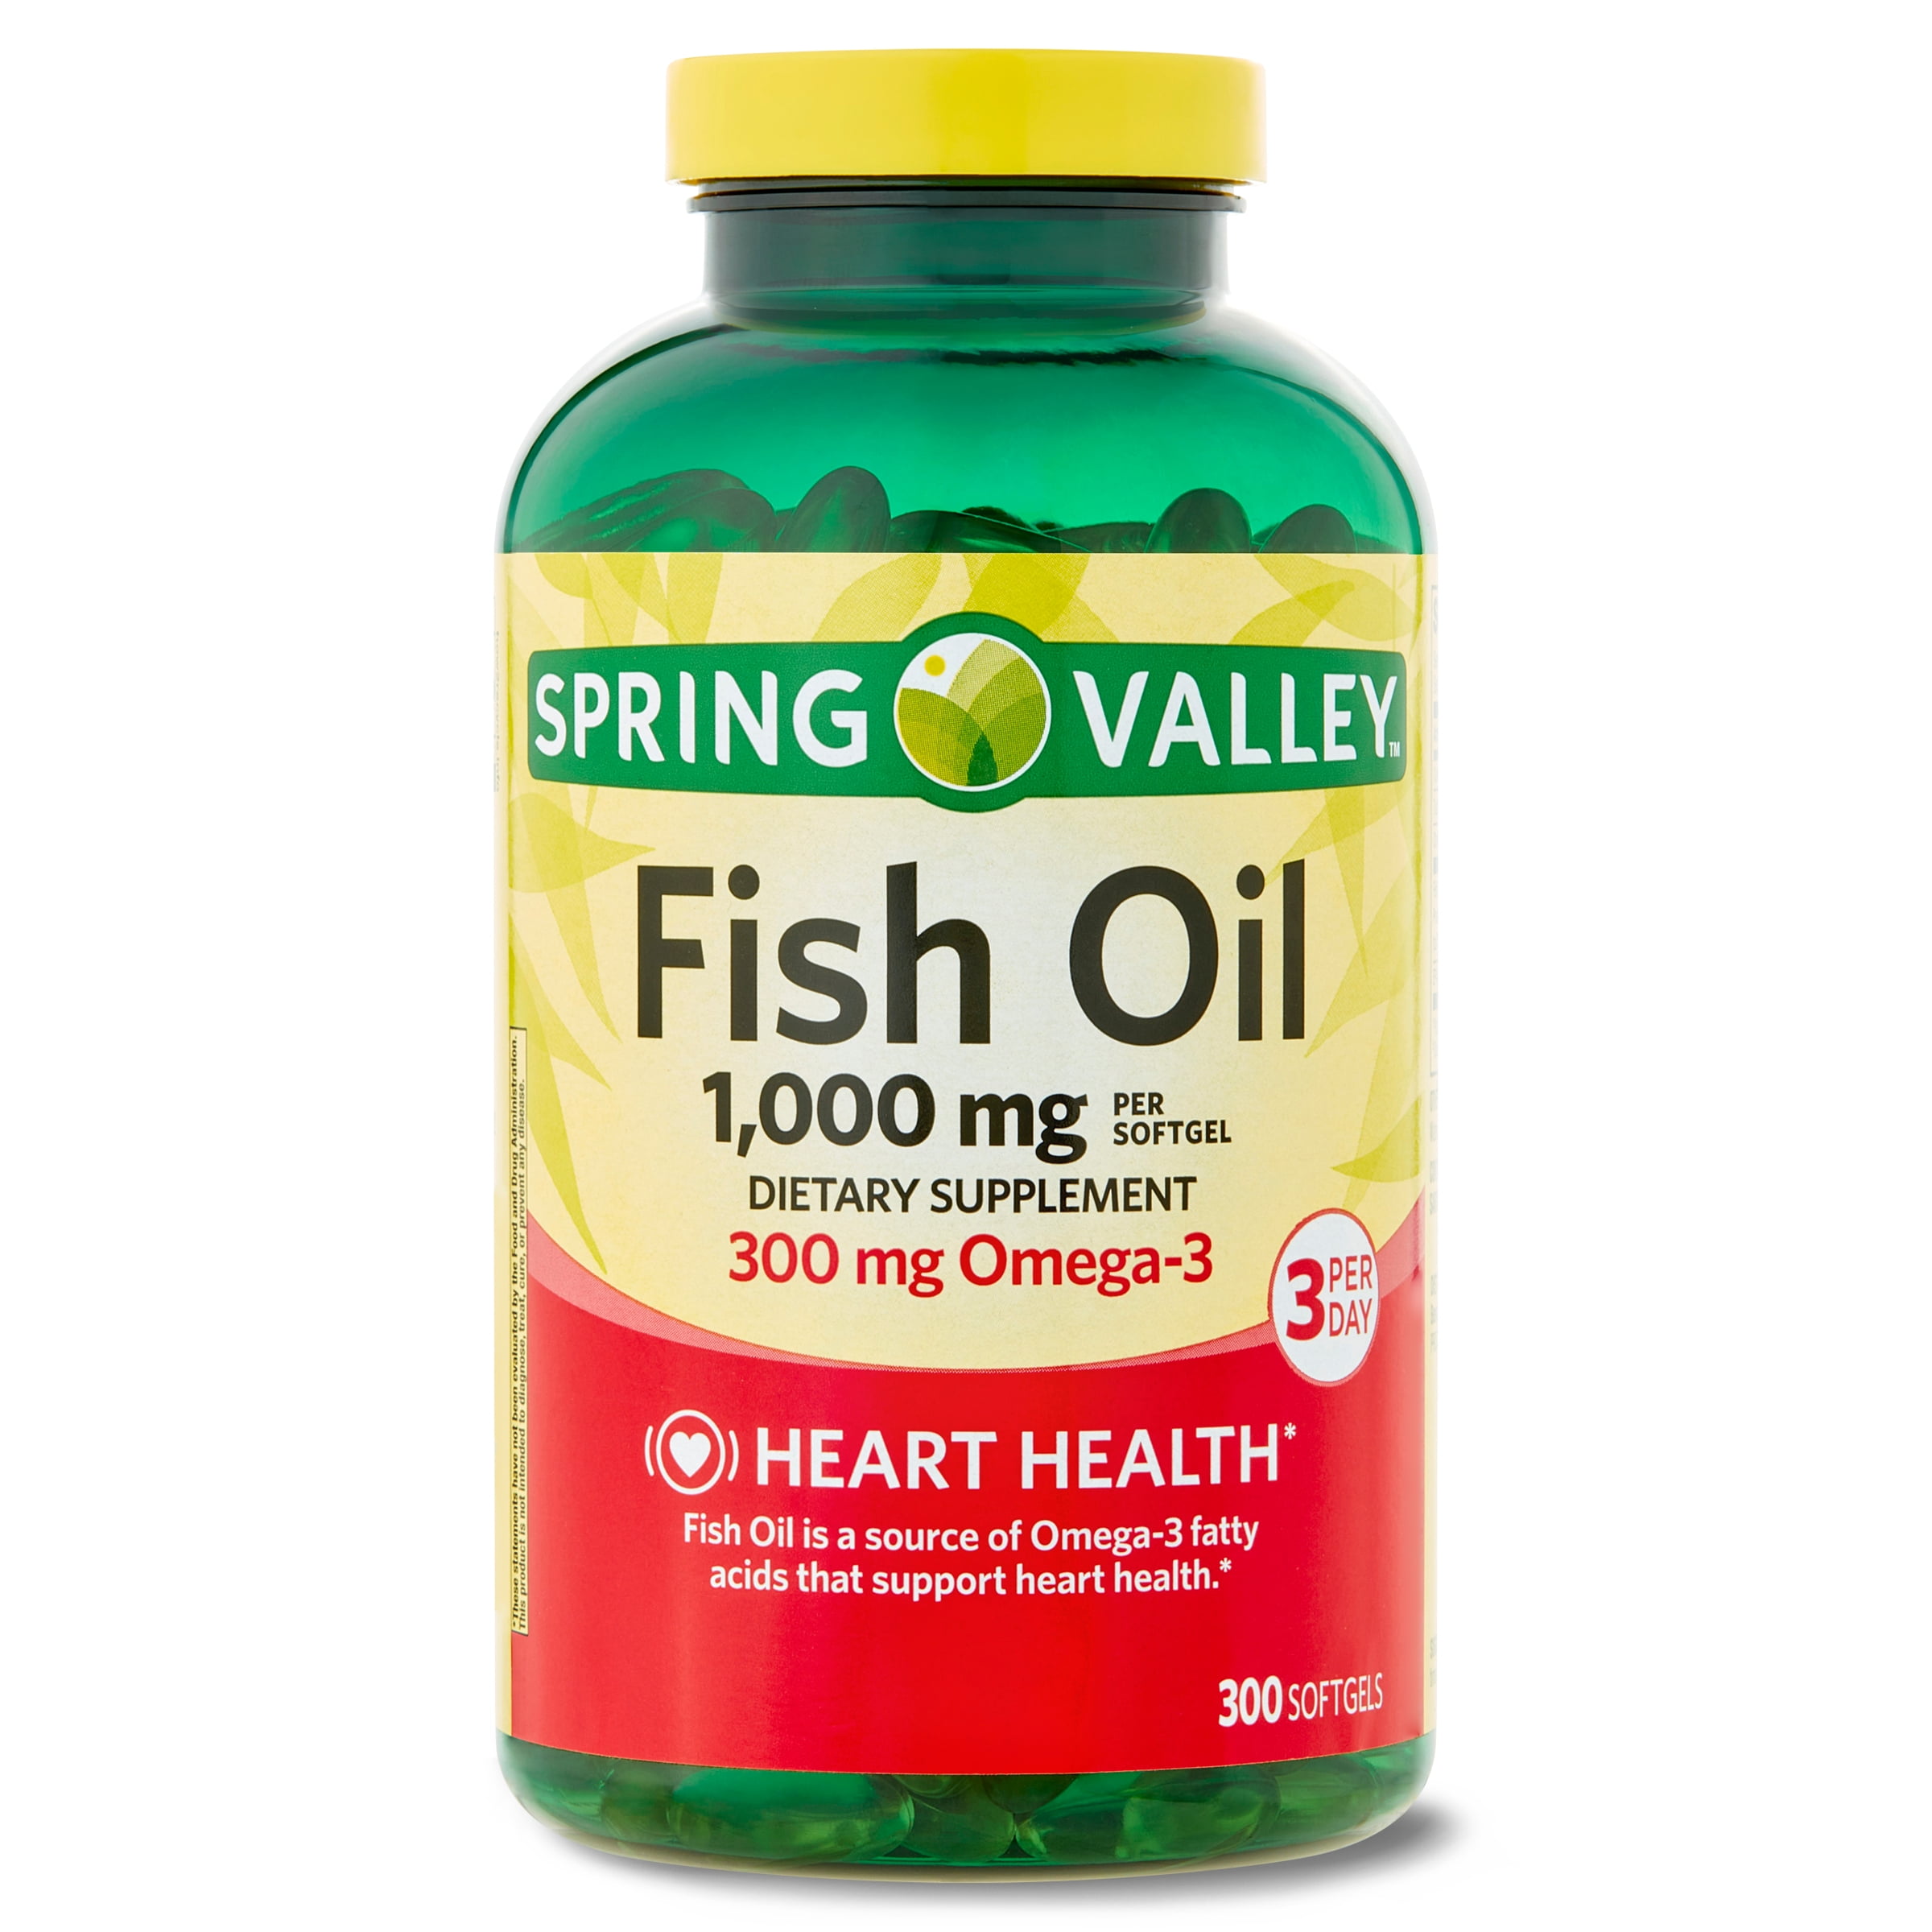 Spring Valley Omega-3 Fish Oil Soft Gels, 1000 mg, 300 Count